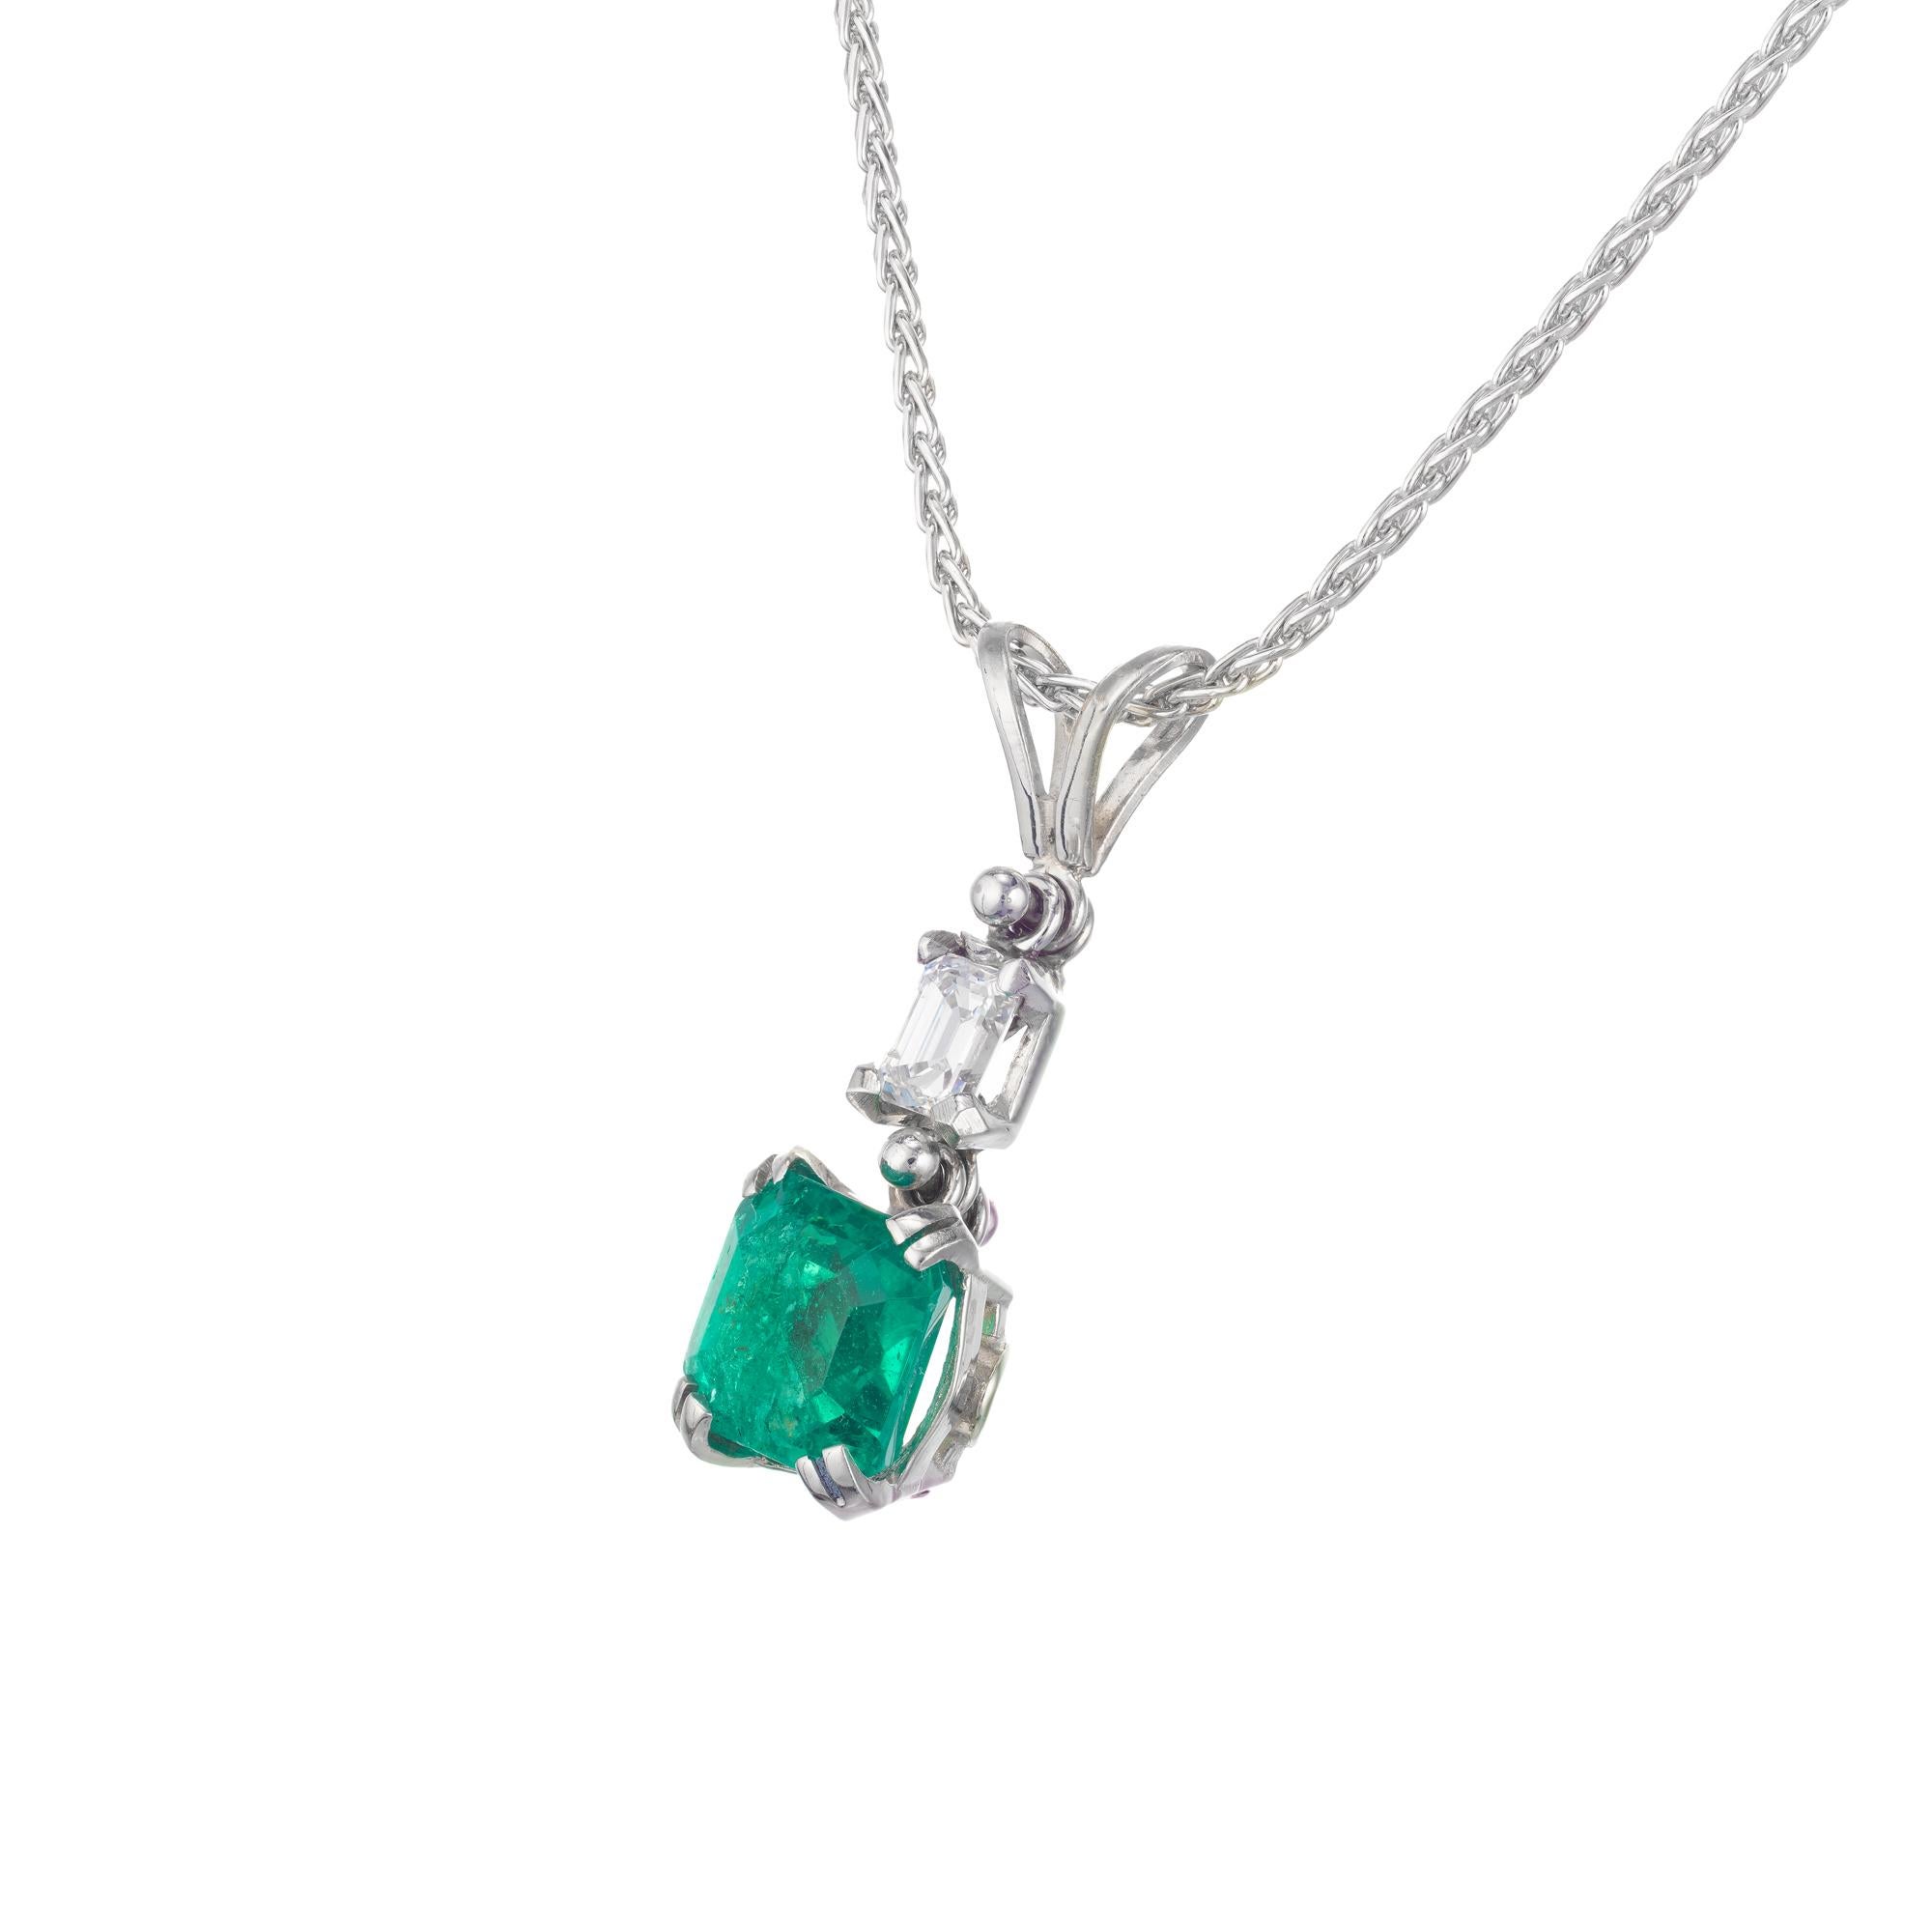 Handmade emerald and diamond platinum pendant necklace. circa 1940s. GIA Certified emerald of vibrant green color in a flexible drop pendant with an emerald cut diamond in a platinum setting and chain. 

1 octagonal cut green SI emerald, Approximate